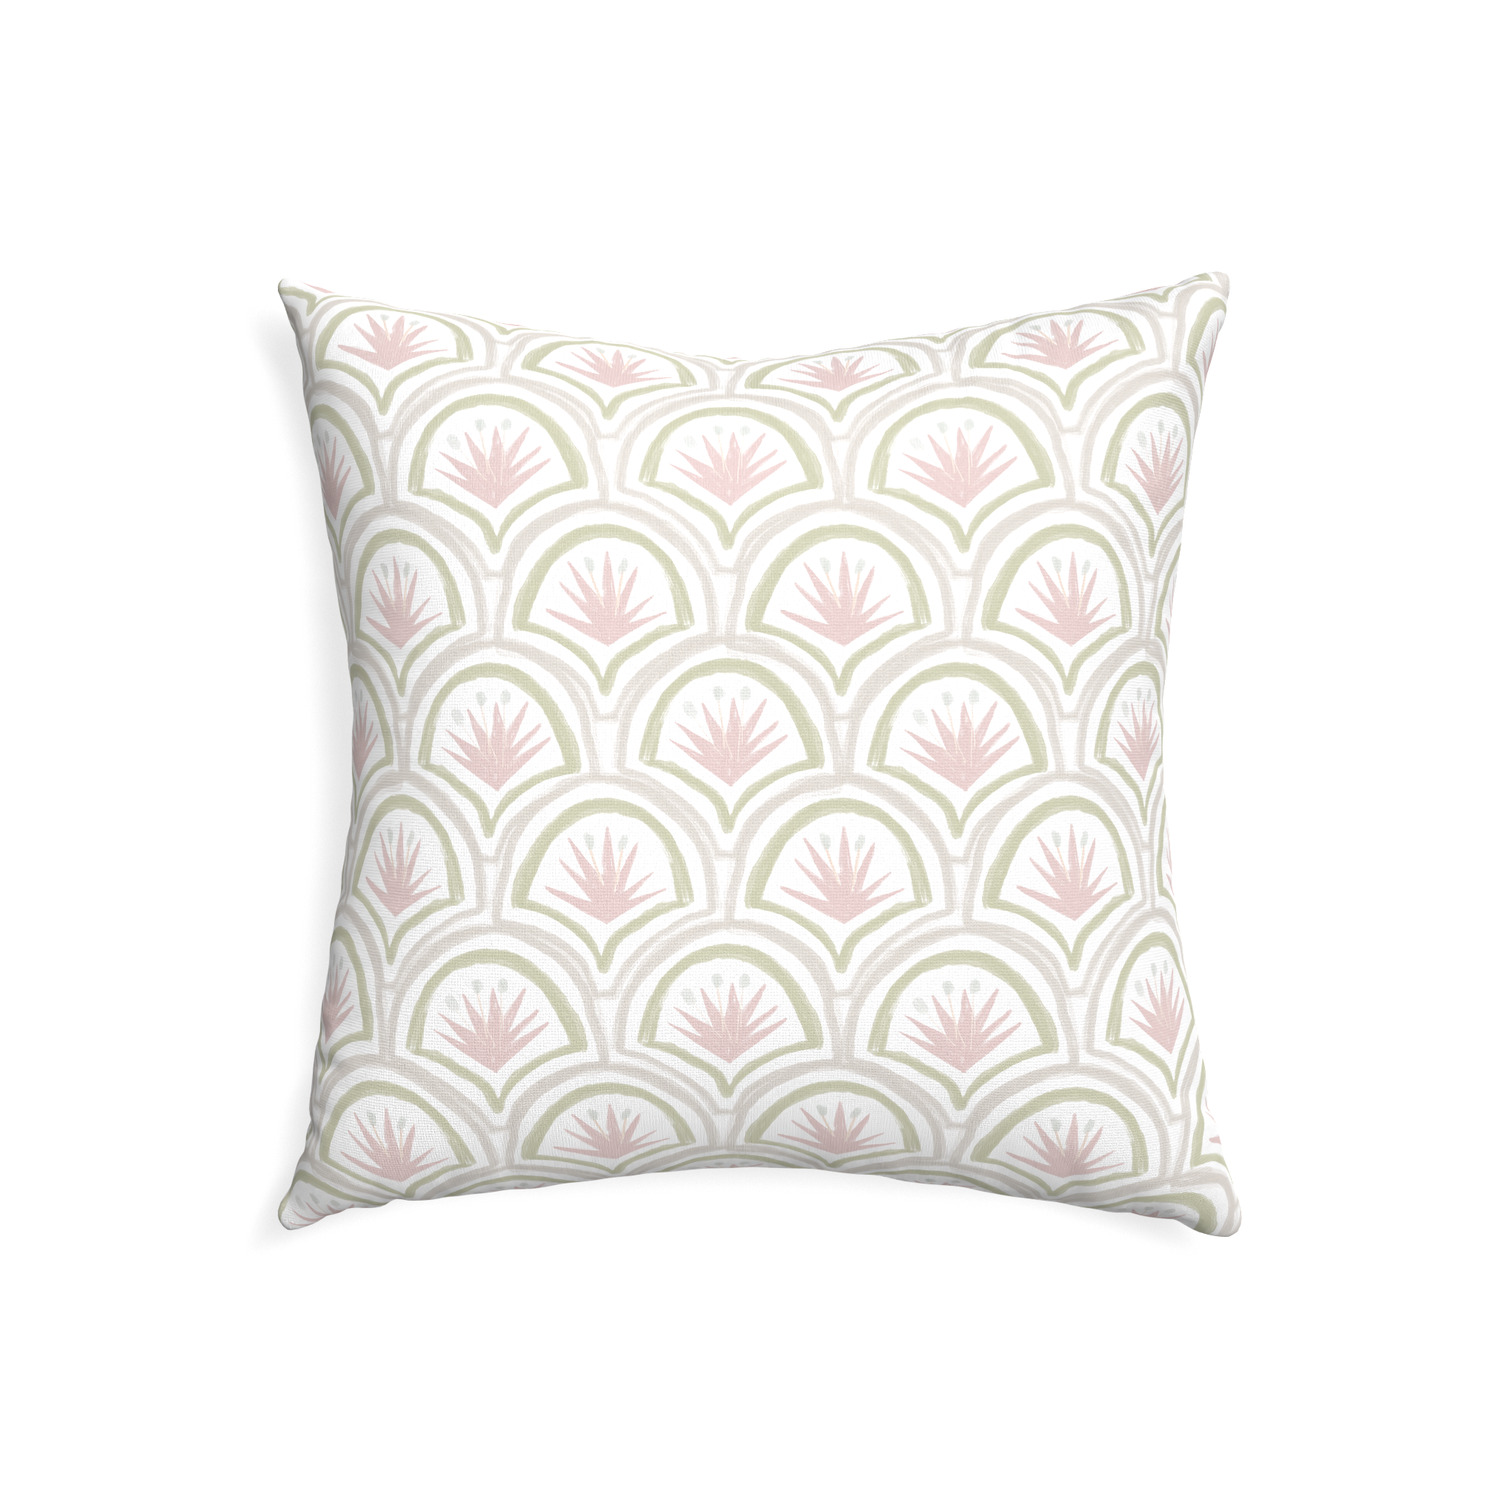 22-square thatcher rose custom pillow with none on white background